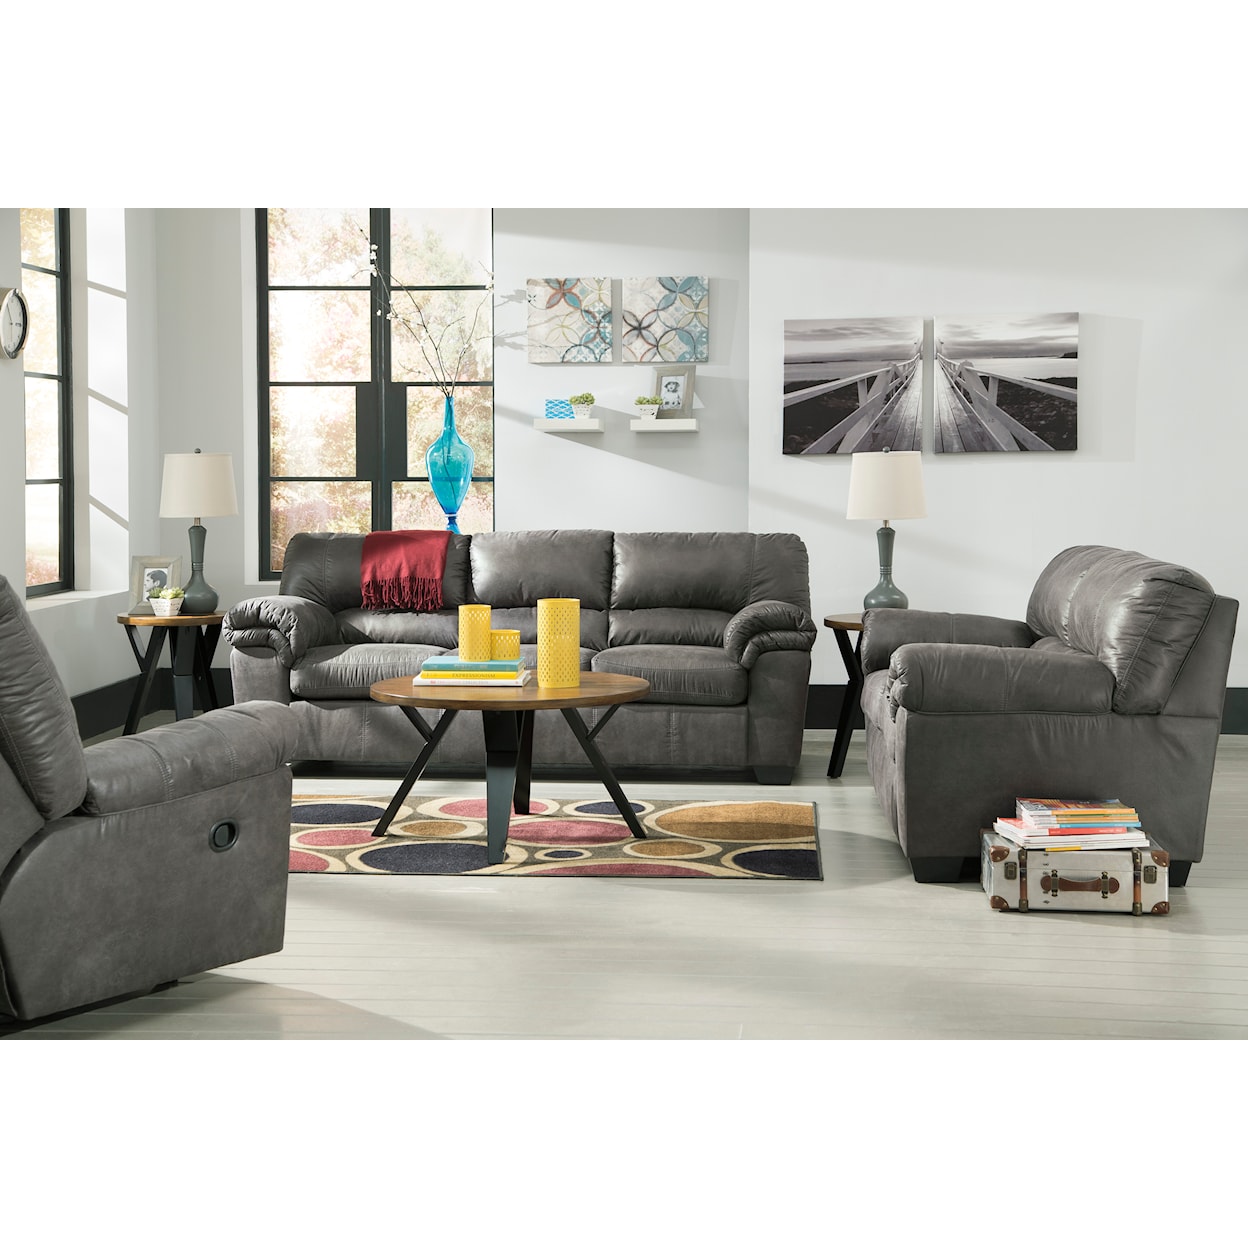 Signature Design by Ashley Bladen Sofa, Loveseat, and Recliner